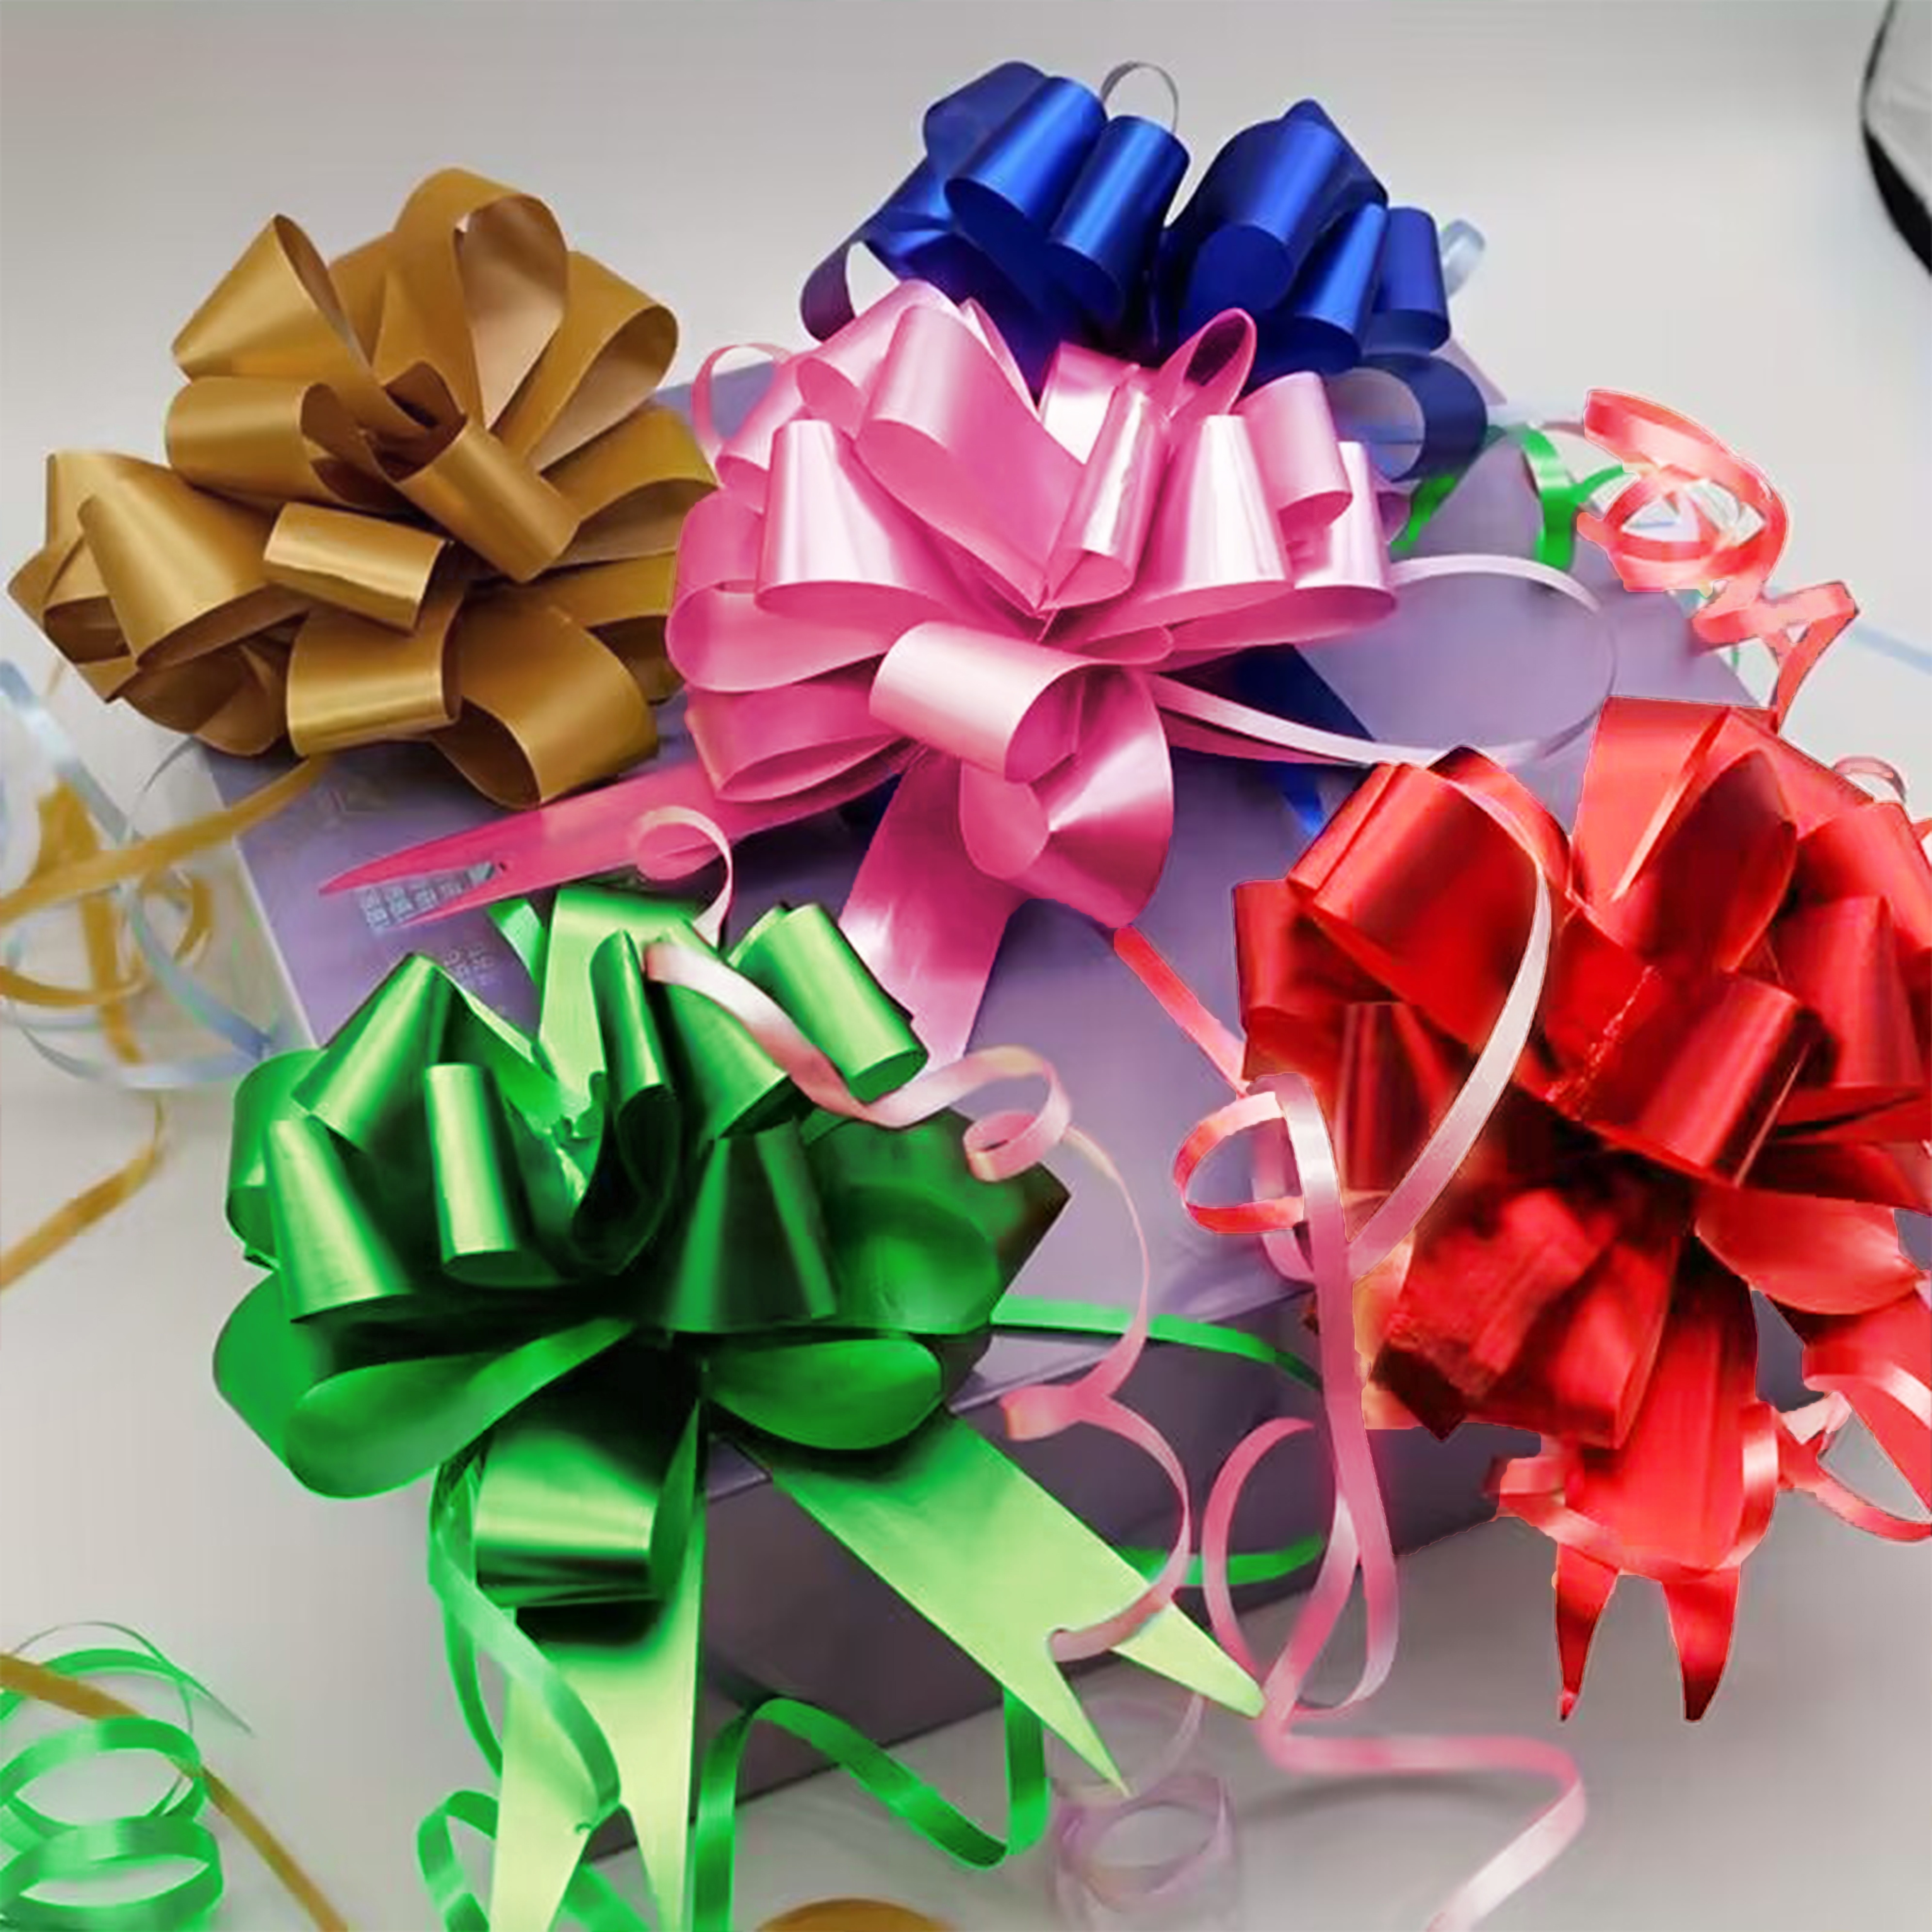 Wholesale wine bottle ribbon bow with elastic for Wrapping and Decorating  Presents 